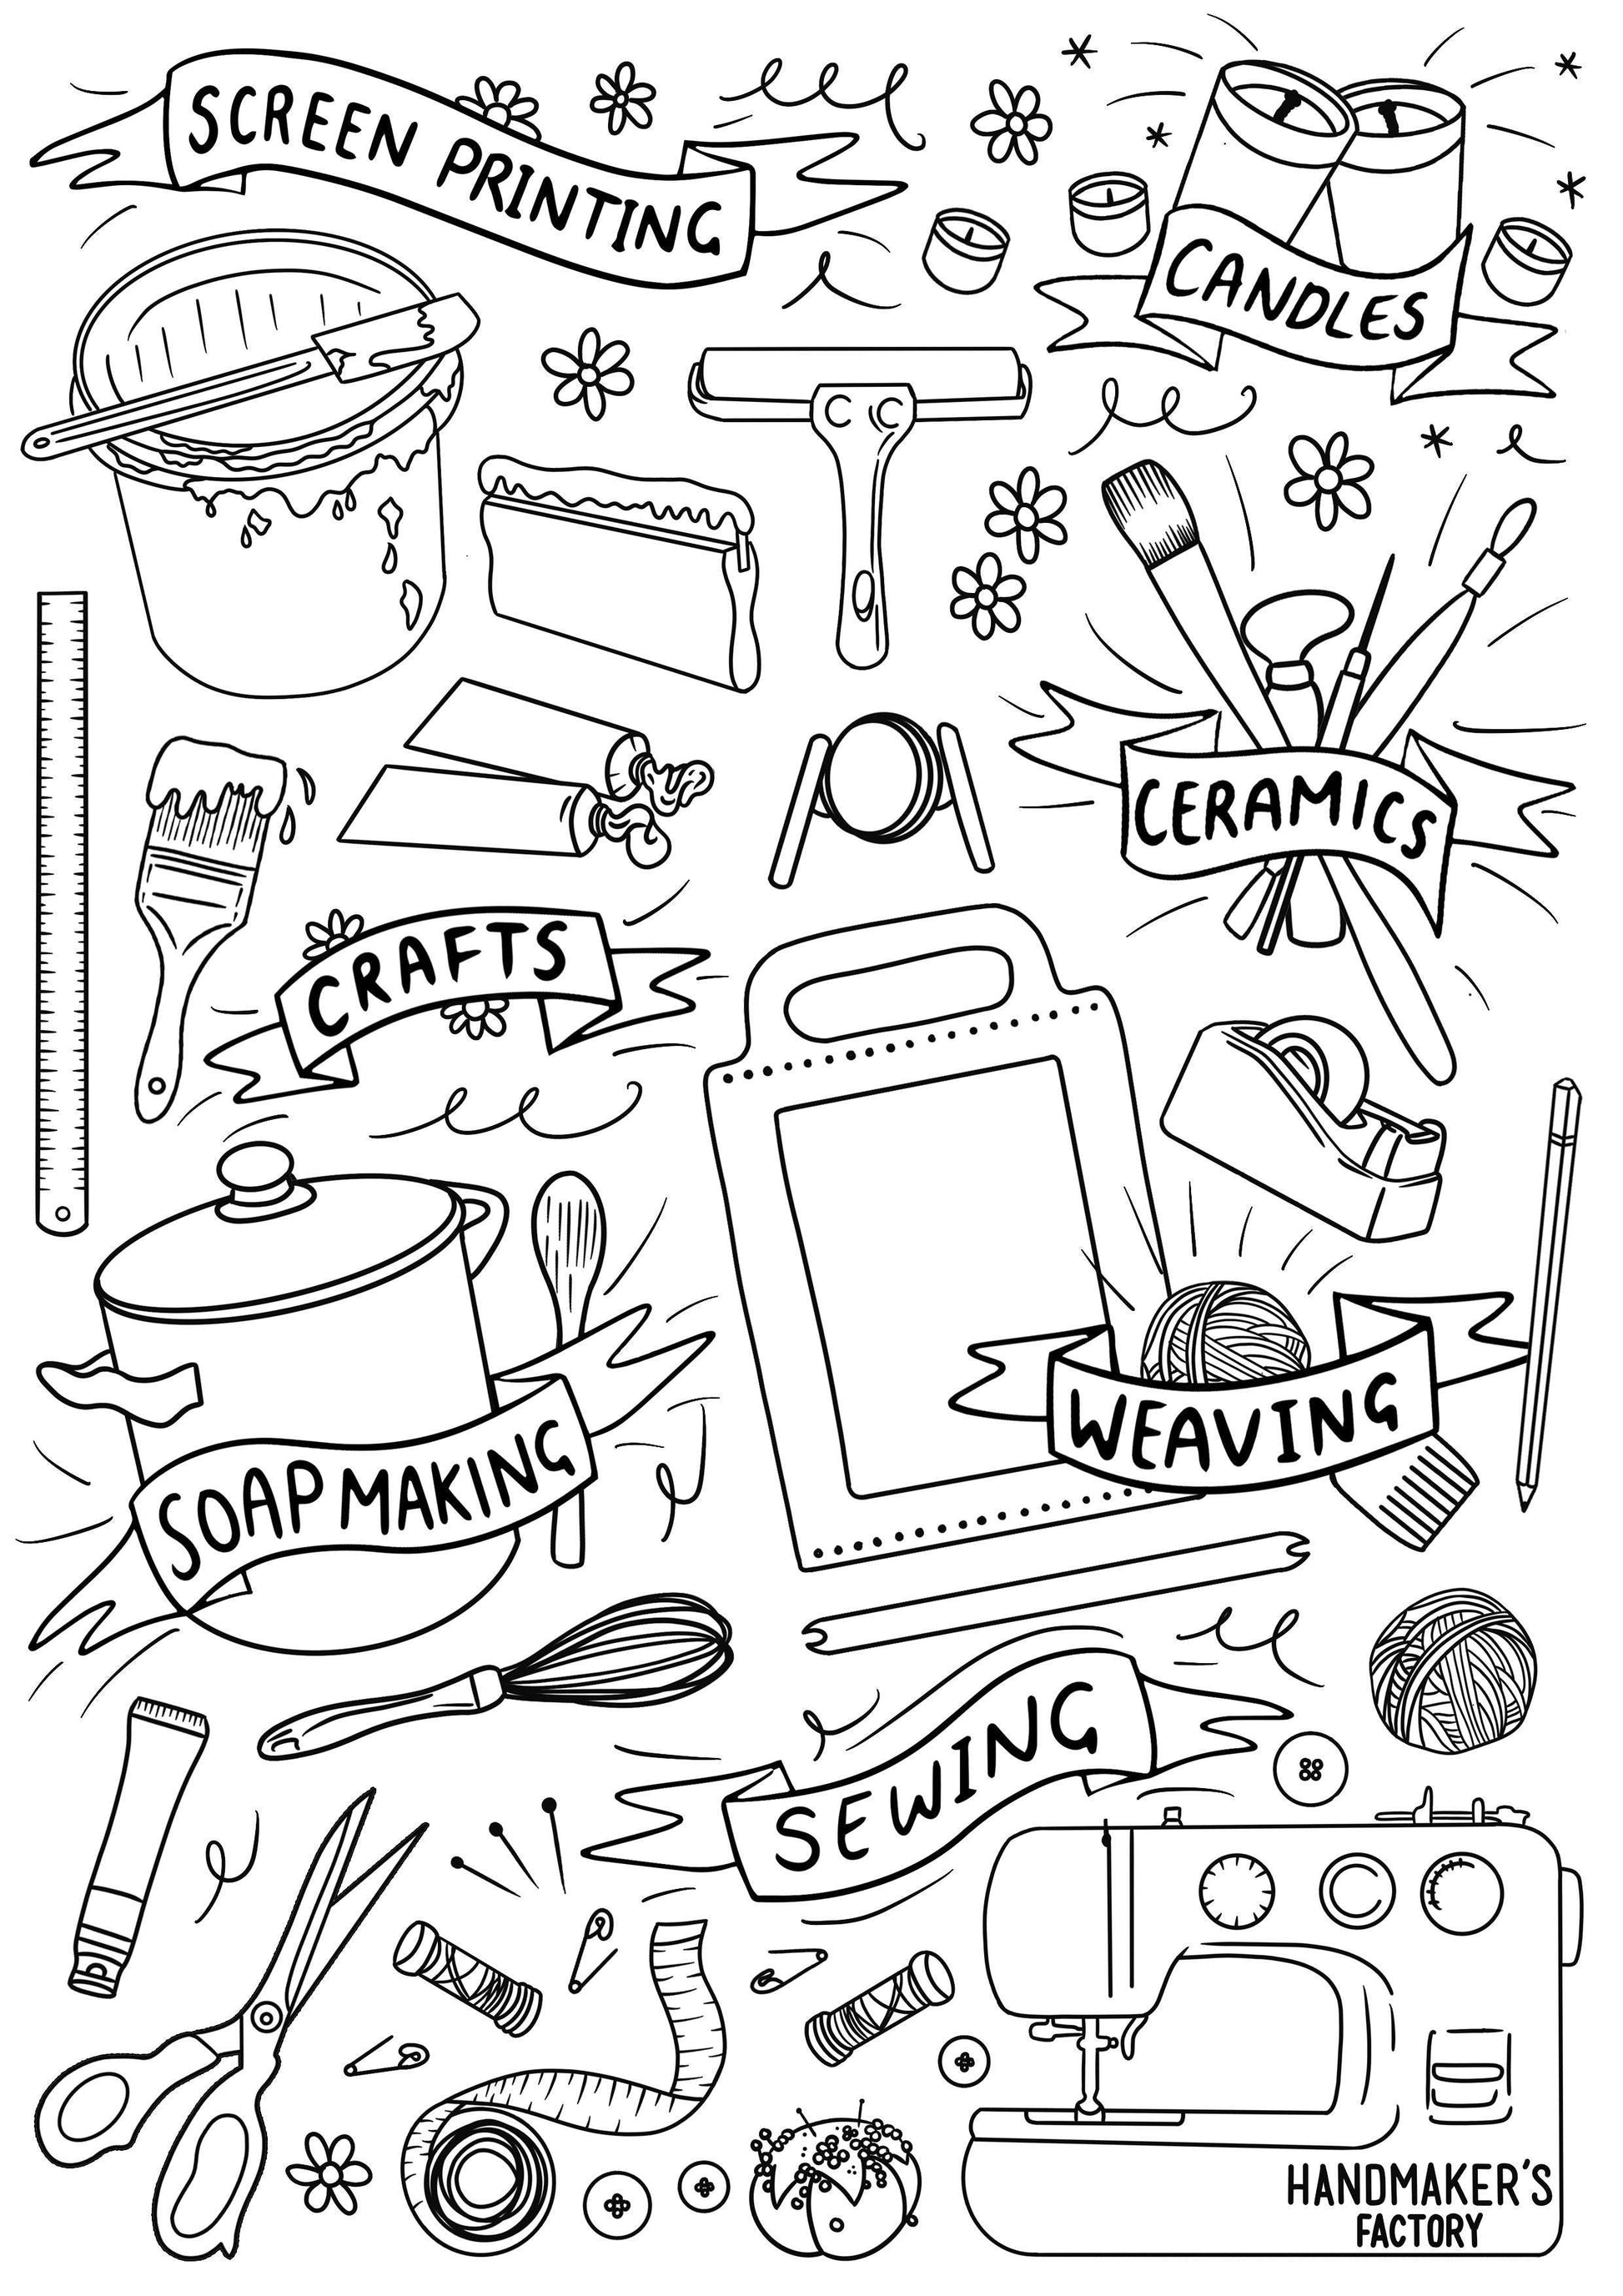 Free Handmaker's Factory Colouring Page - Handmaker's Factory